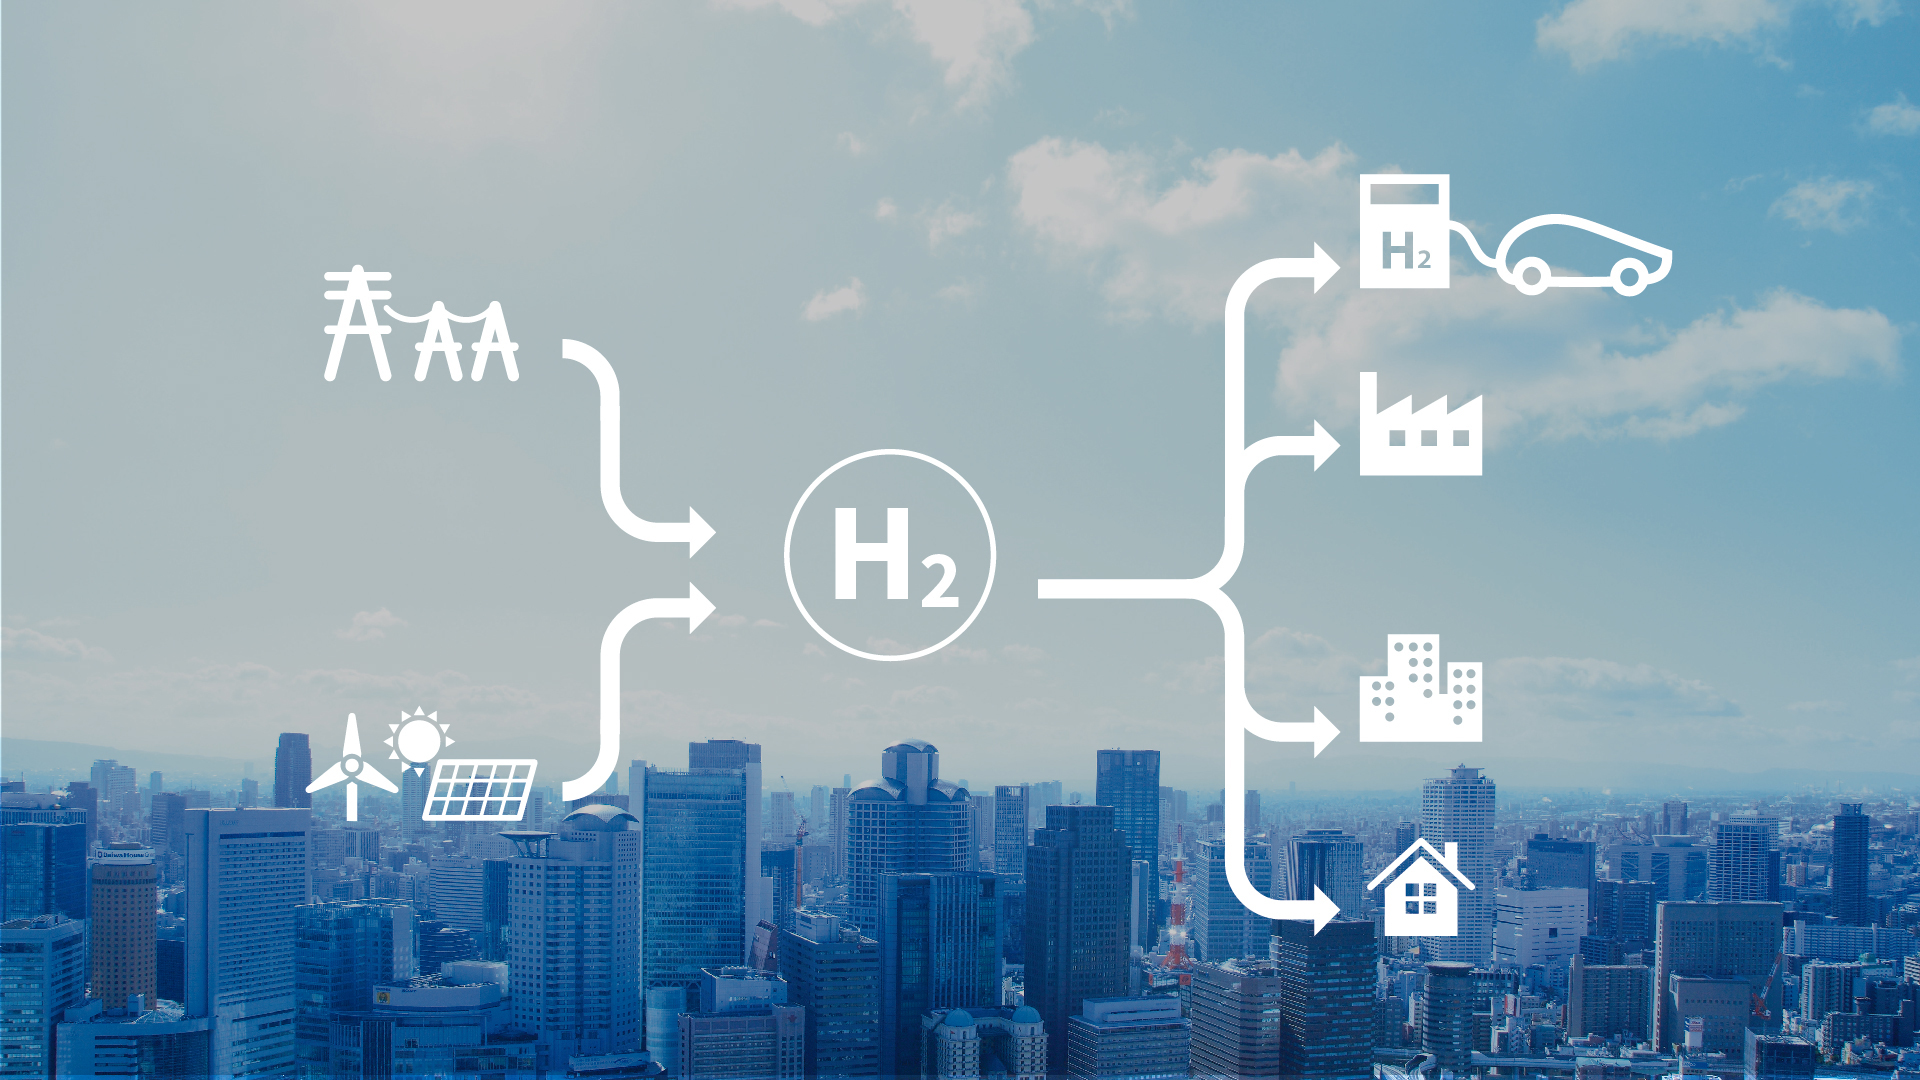 It is possible to produce a huge amount of hydrogen using a multi-megawatt solar power plant and supply the produced hydrogen to the facilities where it is required.